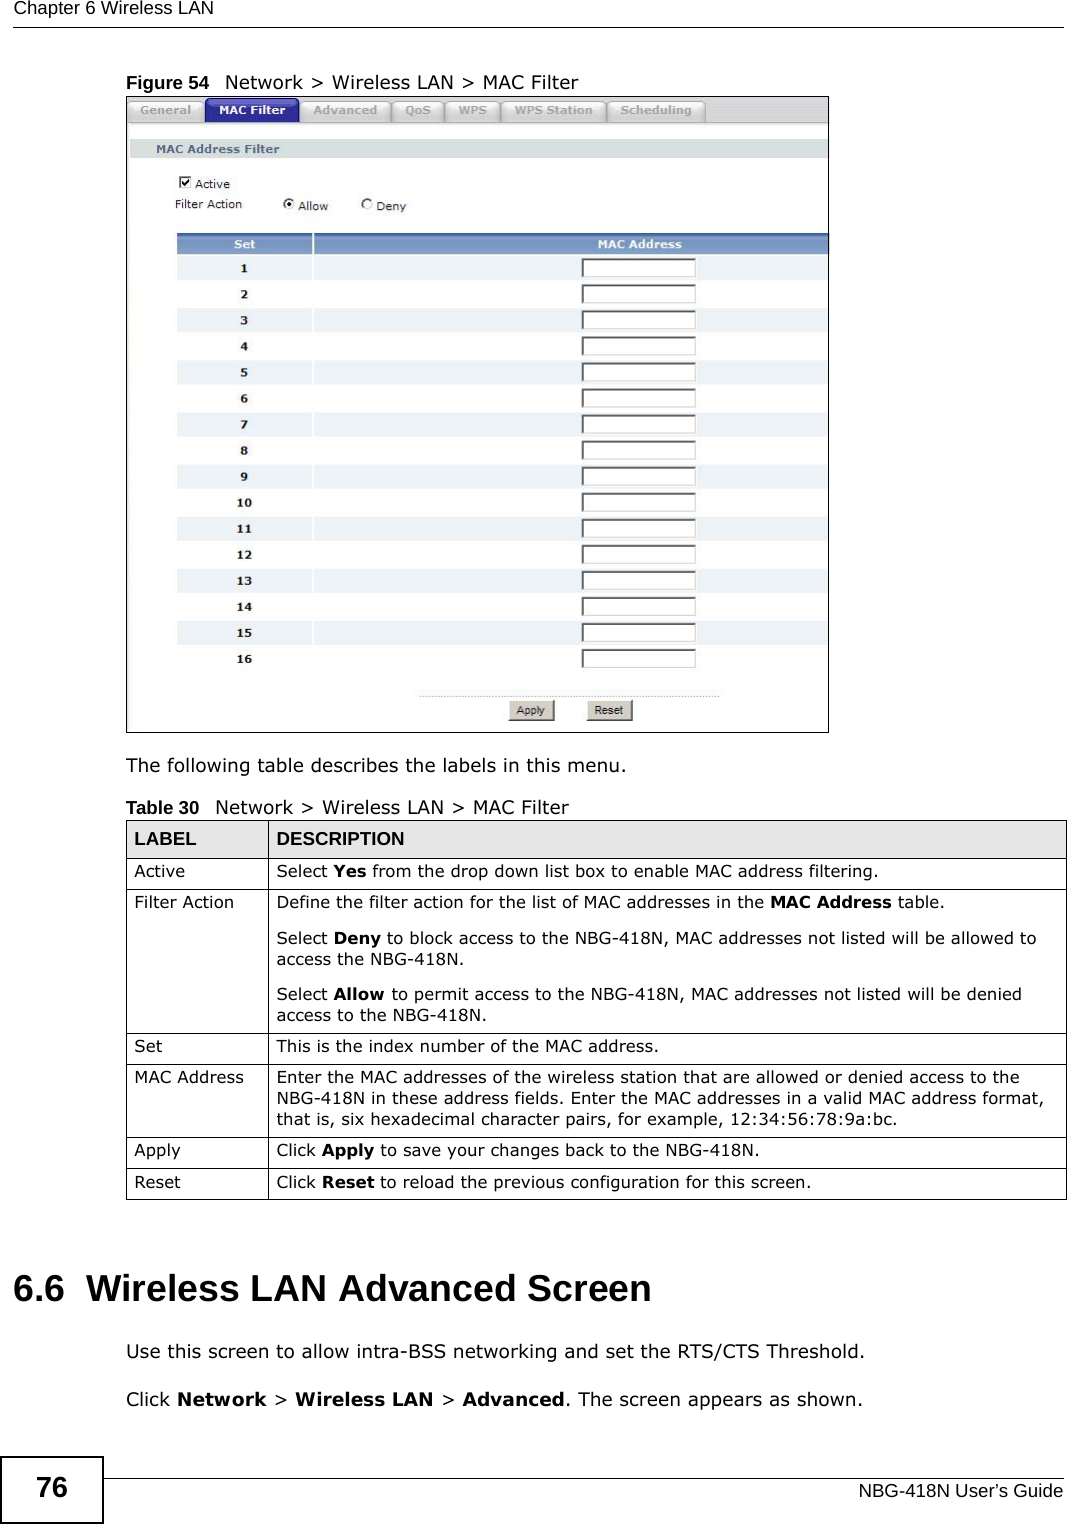 Chapter 6 Wireless LANNBG-418N User’s Guide76Figure 54   Network &gt; Wireless LAN &gt; MAC FilterThe following table describes the labels in this menu.6.6  Wireless LAN Advanced ScreenUse this screen to allow intra-BSS networking and set the RTS/CTS Threshold.Click Network &gt; Wireless LAN &gt; Advanced. The screen appears as shown.Table 30   Network &gt; Wireless LAN &gt; MAC FilterLABEL DESCRIPTIONActive Select Yes from the drop down list box to enable MAC address filtering.Filter Action  Define the filter action for the list of MAC addresses in the MAC Address table. Select Deny to block access to the NBG-418N, MAC addresses not listed will be allowed to access the NBG-418N. Select Allow to permit access to the NBG-418N, MAC addresses not listed will be denied access to the NBG-418N. Set This is the index number of the MAC address.MAC Address Enter the MAC addresses of the wireless station that are allowed or denied access to the NBG-418N in these address fields. Enter the MAC addresses in a valid MAC address format, that is, six hexadecimal character pairs, for example, 12:34:56:78:9a:bc.Apply Click Apply to save your changes back to the NBG-418N.Reset Click Reset to reload the previous configuration for this screen.